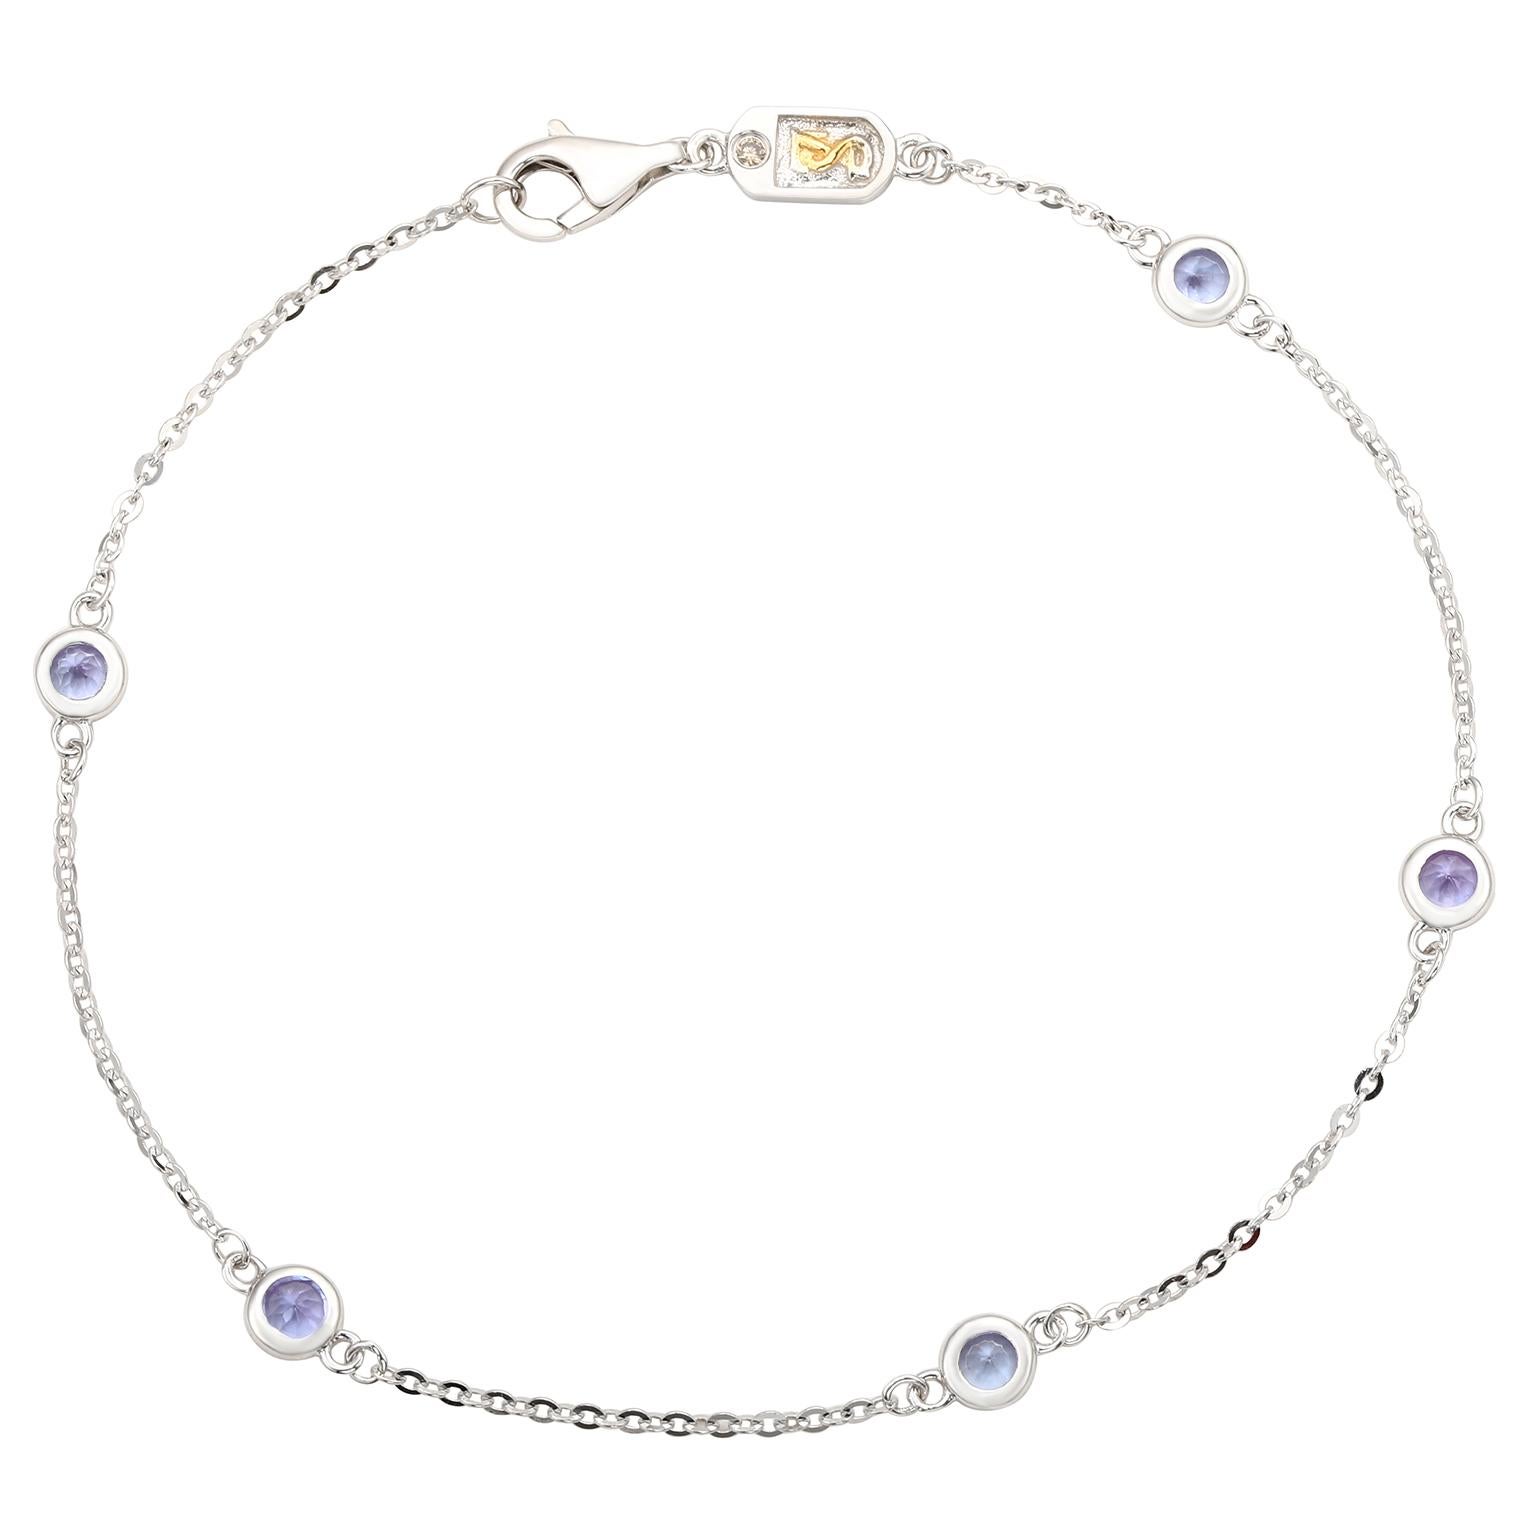 Adorn your hand with sparkling shimmers with this beautiful tanzanite station bracelet. This bracelet can be worn stackable with other bracelets or as a single bracelet, making it the perfect bracelet for every occasion. This bracelet features five